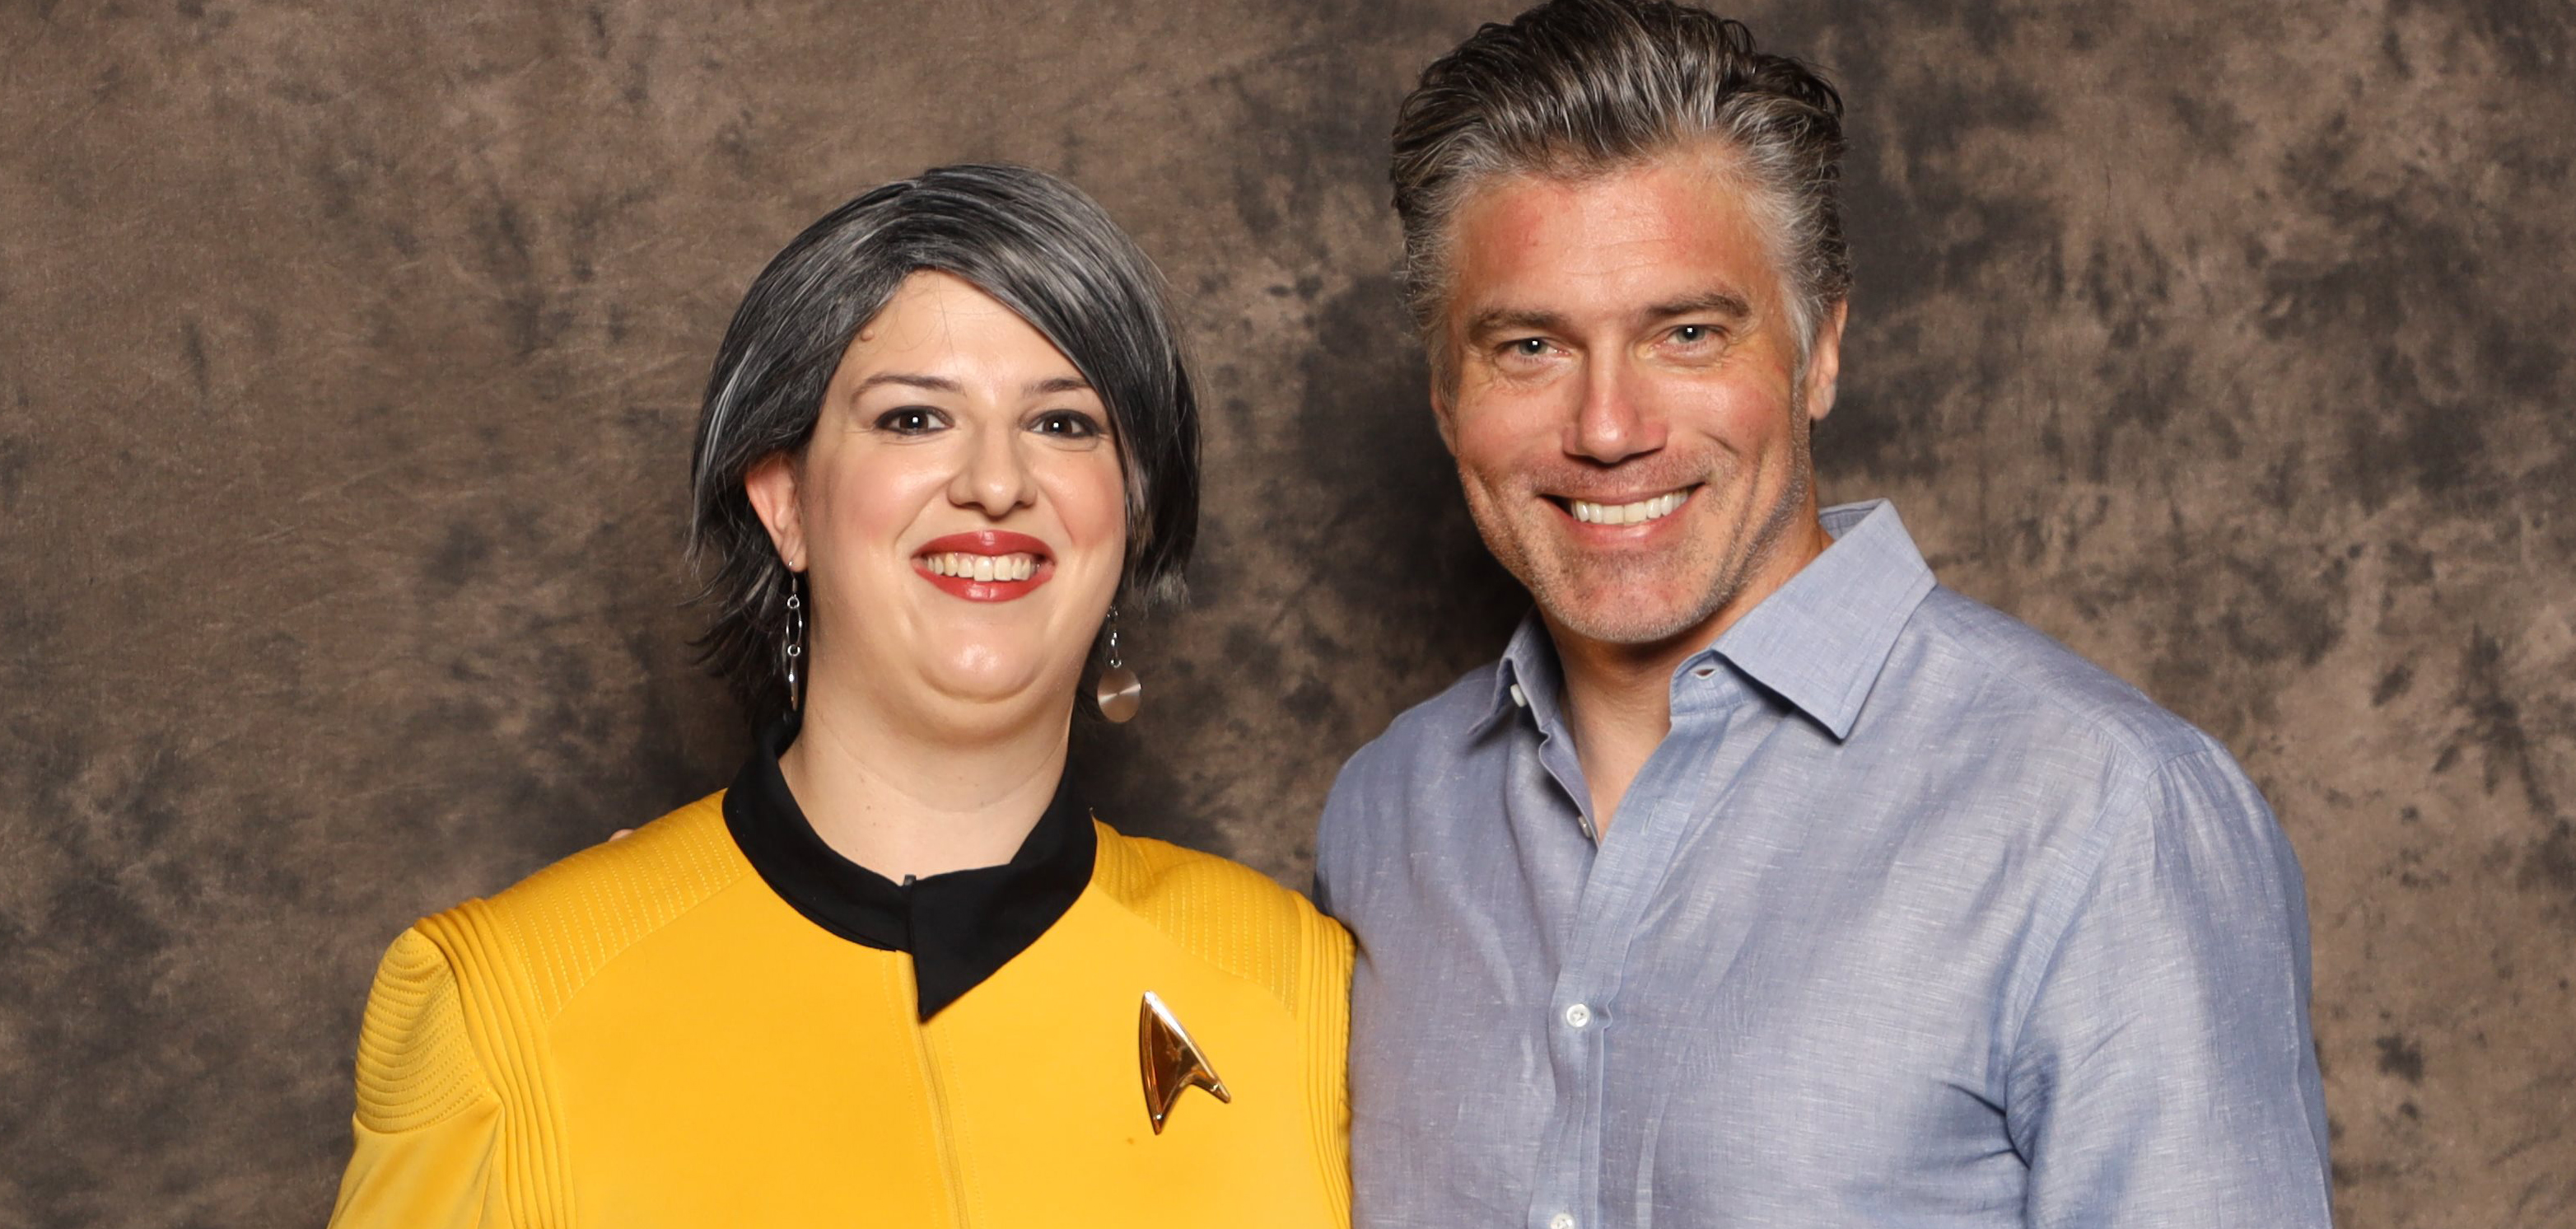 Anson Mount and Captain Pike